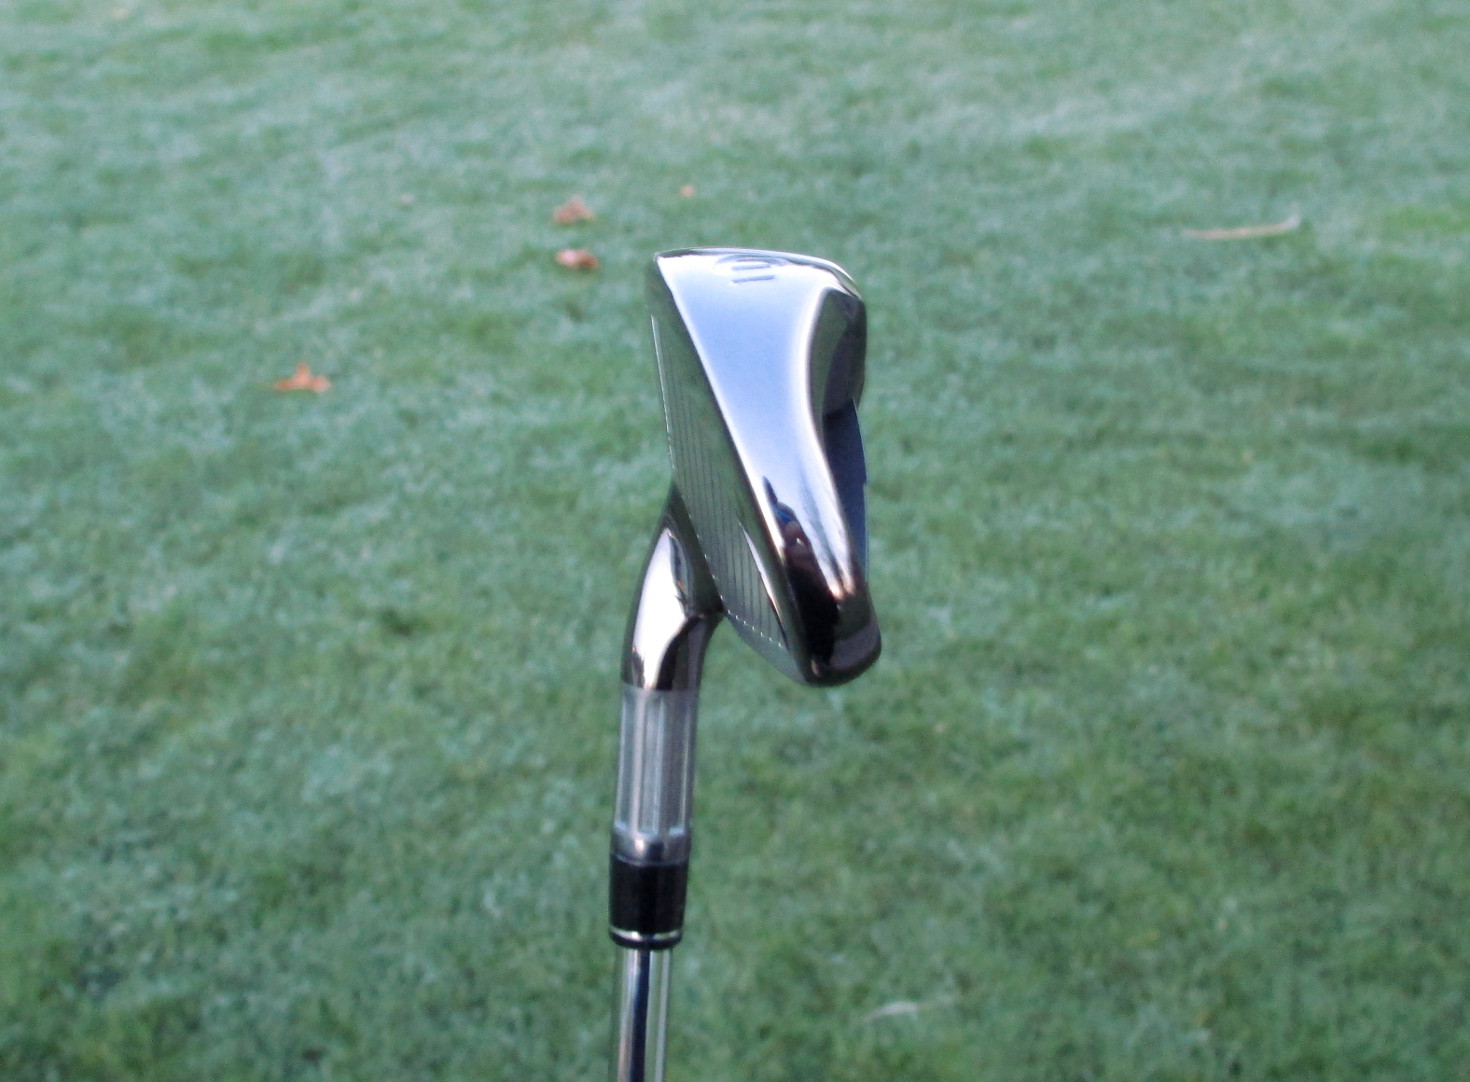 High and far are the watch words of the M2 irons, provided you make a decent swing and contact.